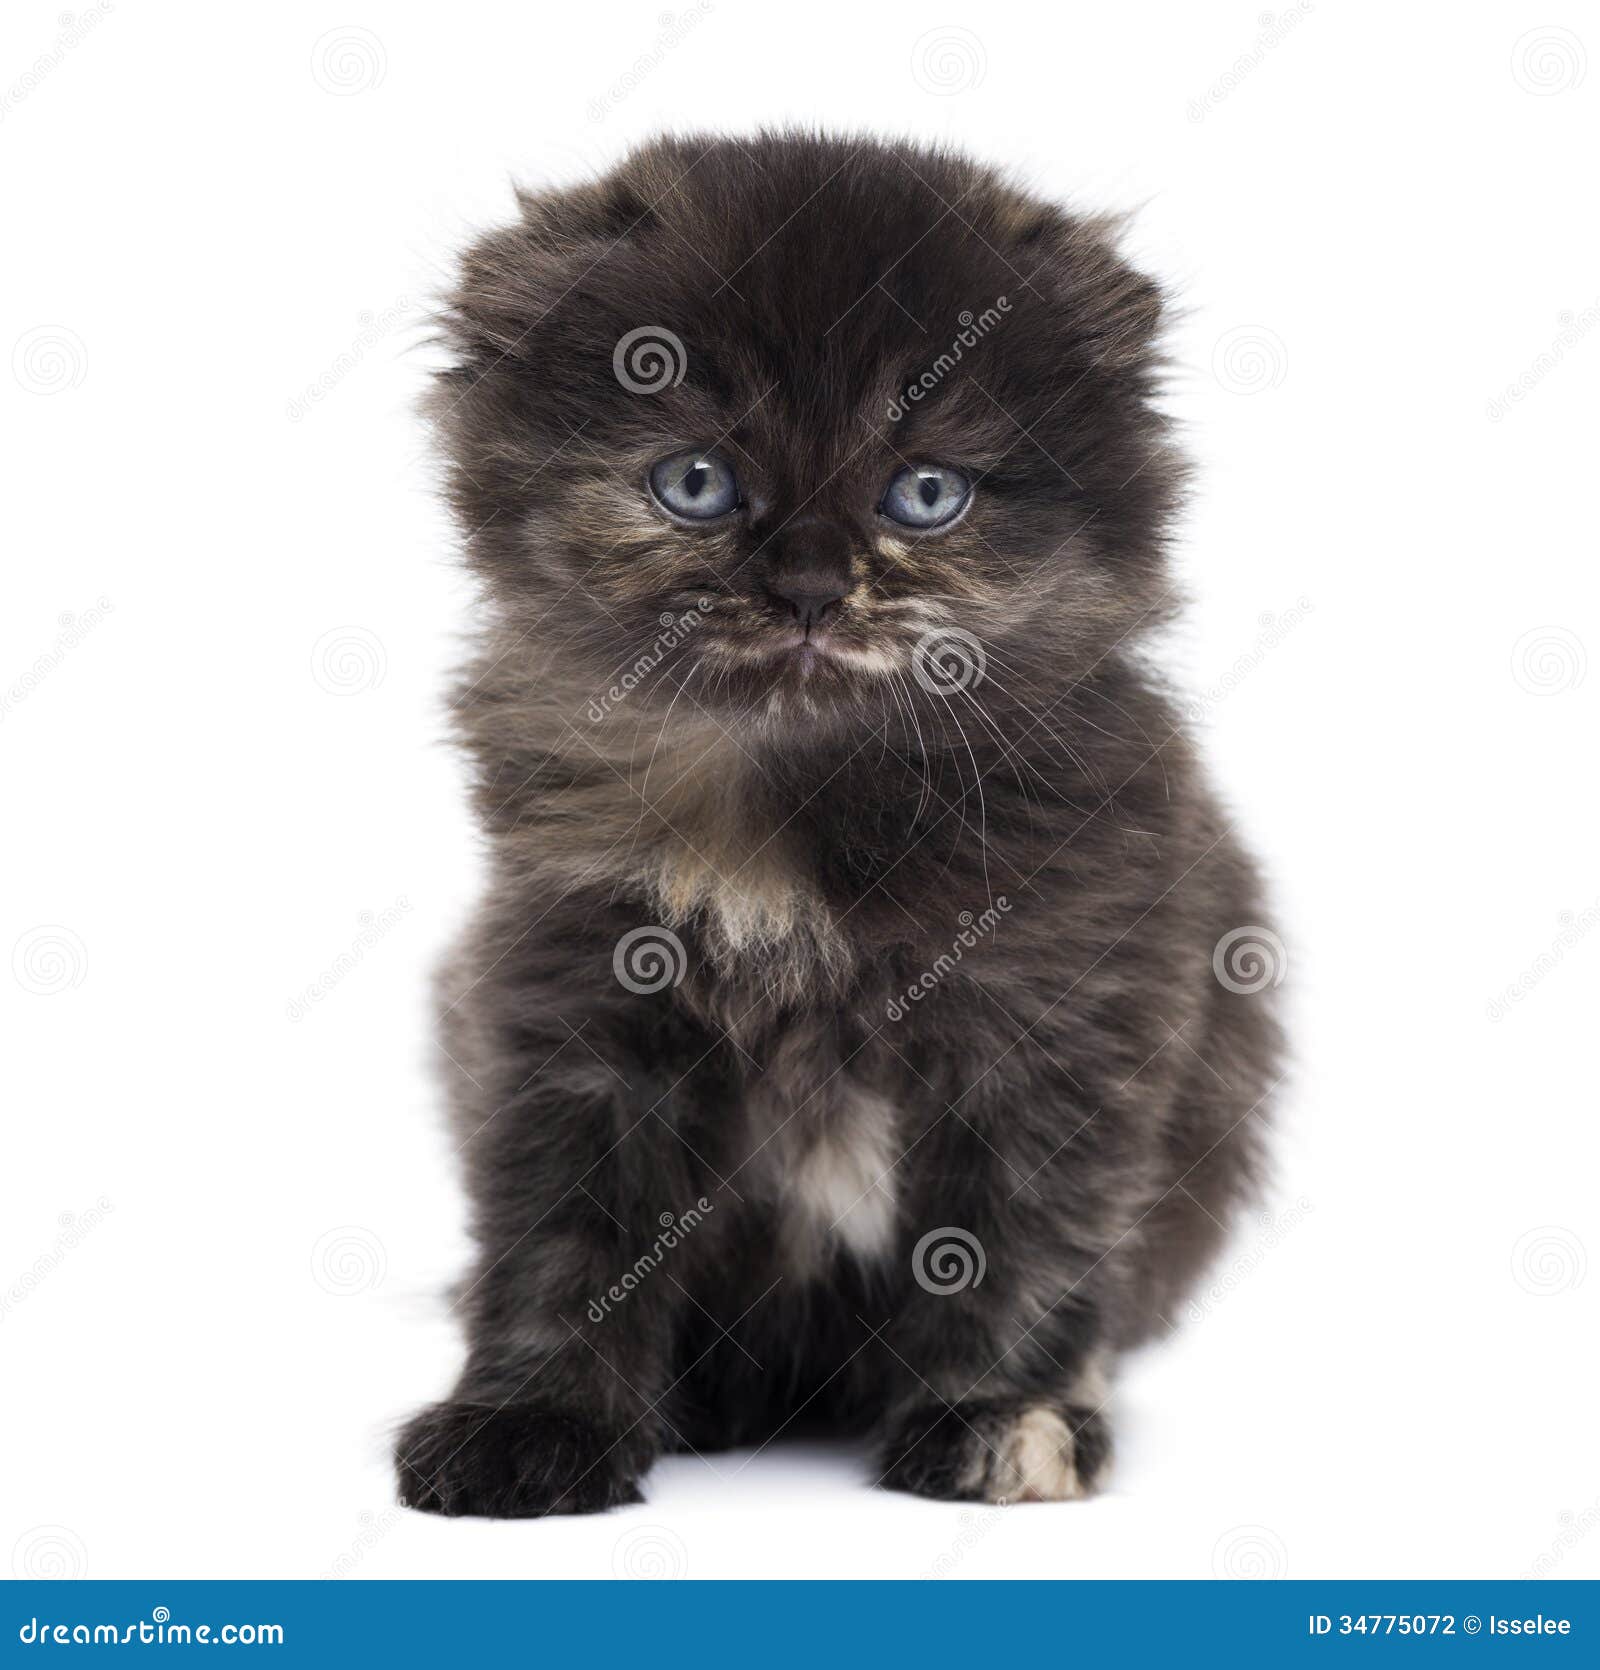 Front View Of A Highland Fold Kitten Looking At The Camera ...